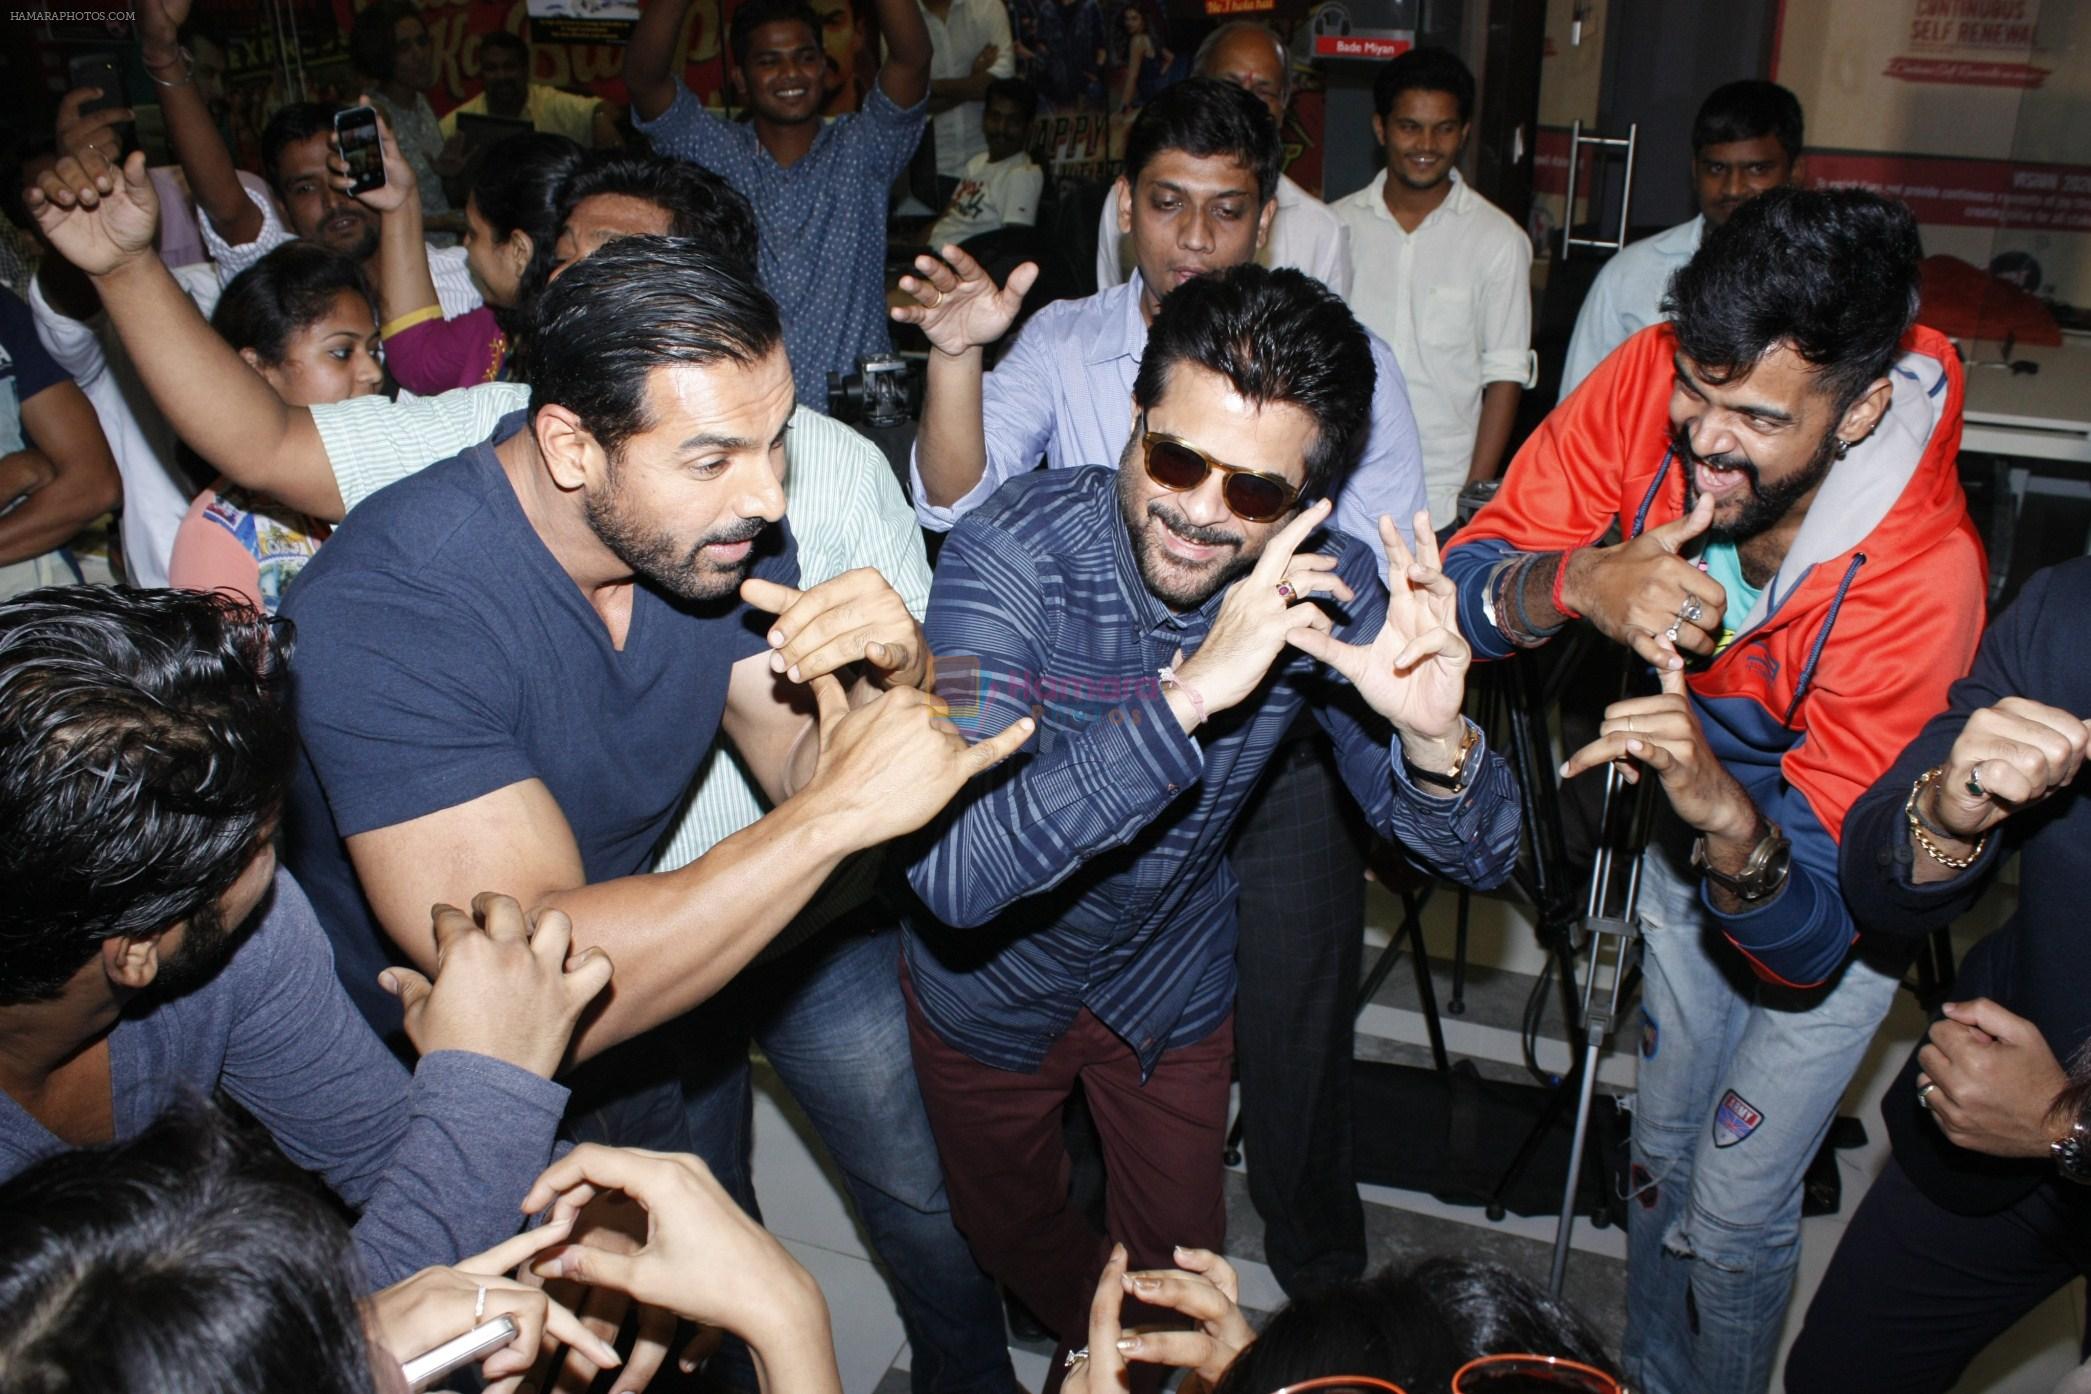 John Abraham, Anil Kapoor at Welcome Back Promotion at Fever 104 fm on 6th Aug 2015